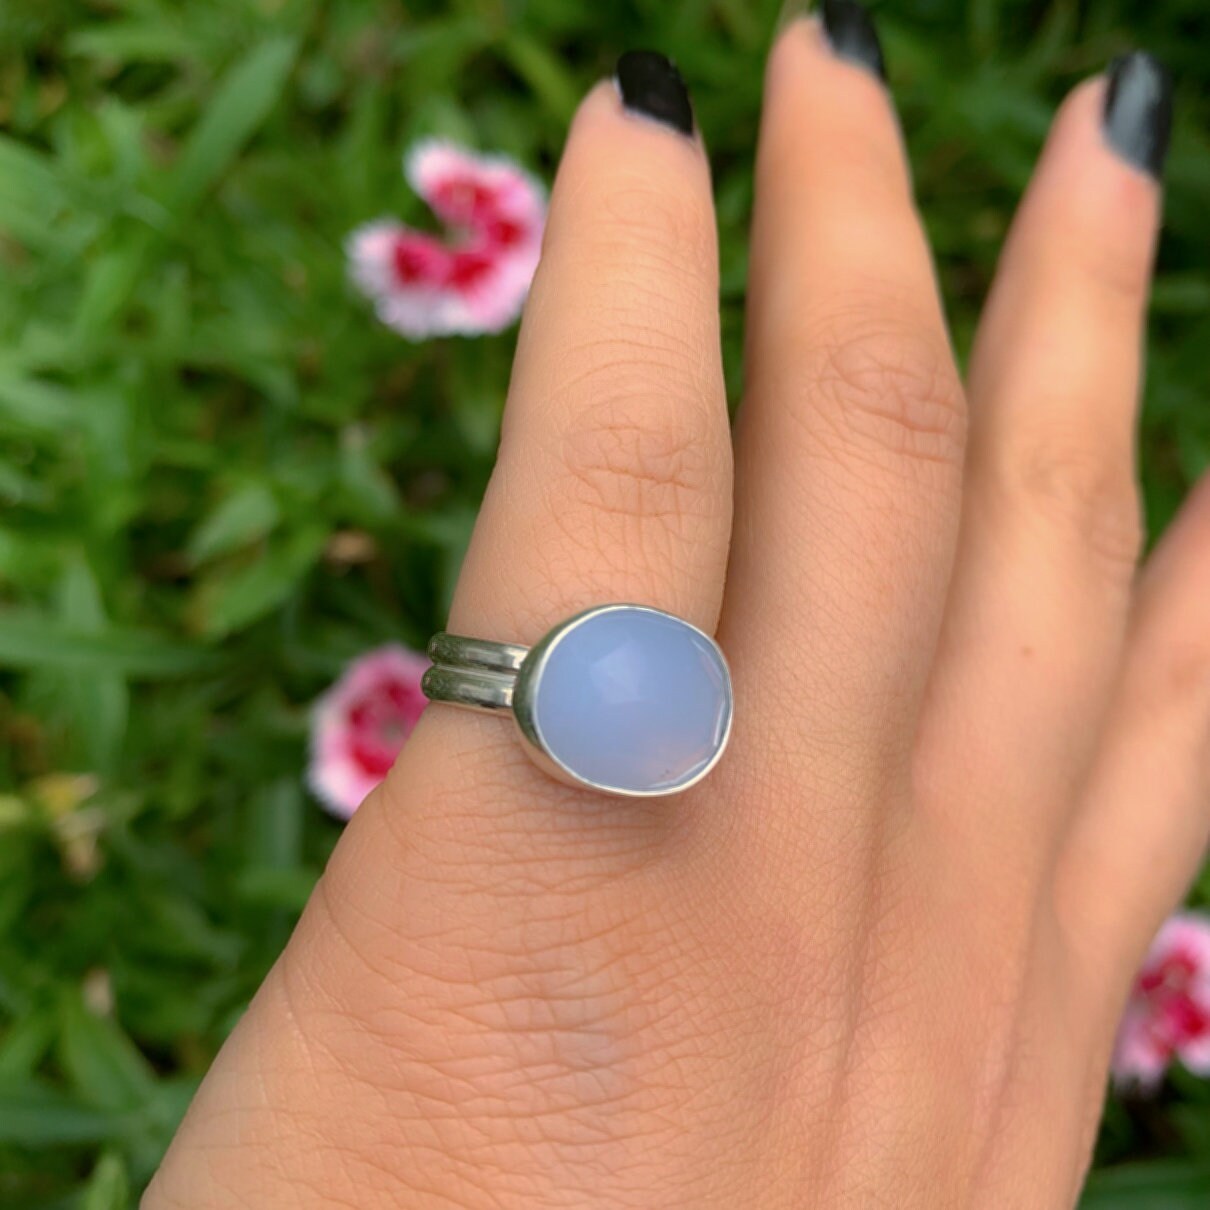 Rose Cut Blue Lace Agate Ring - Size 5 - Sterling Silver - Light Blue Gemstone Ring, Faceted Blue Lace Agate Jewelry, Dainty Blue Stone Ring